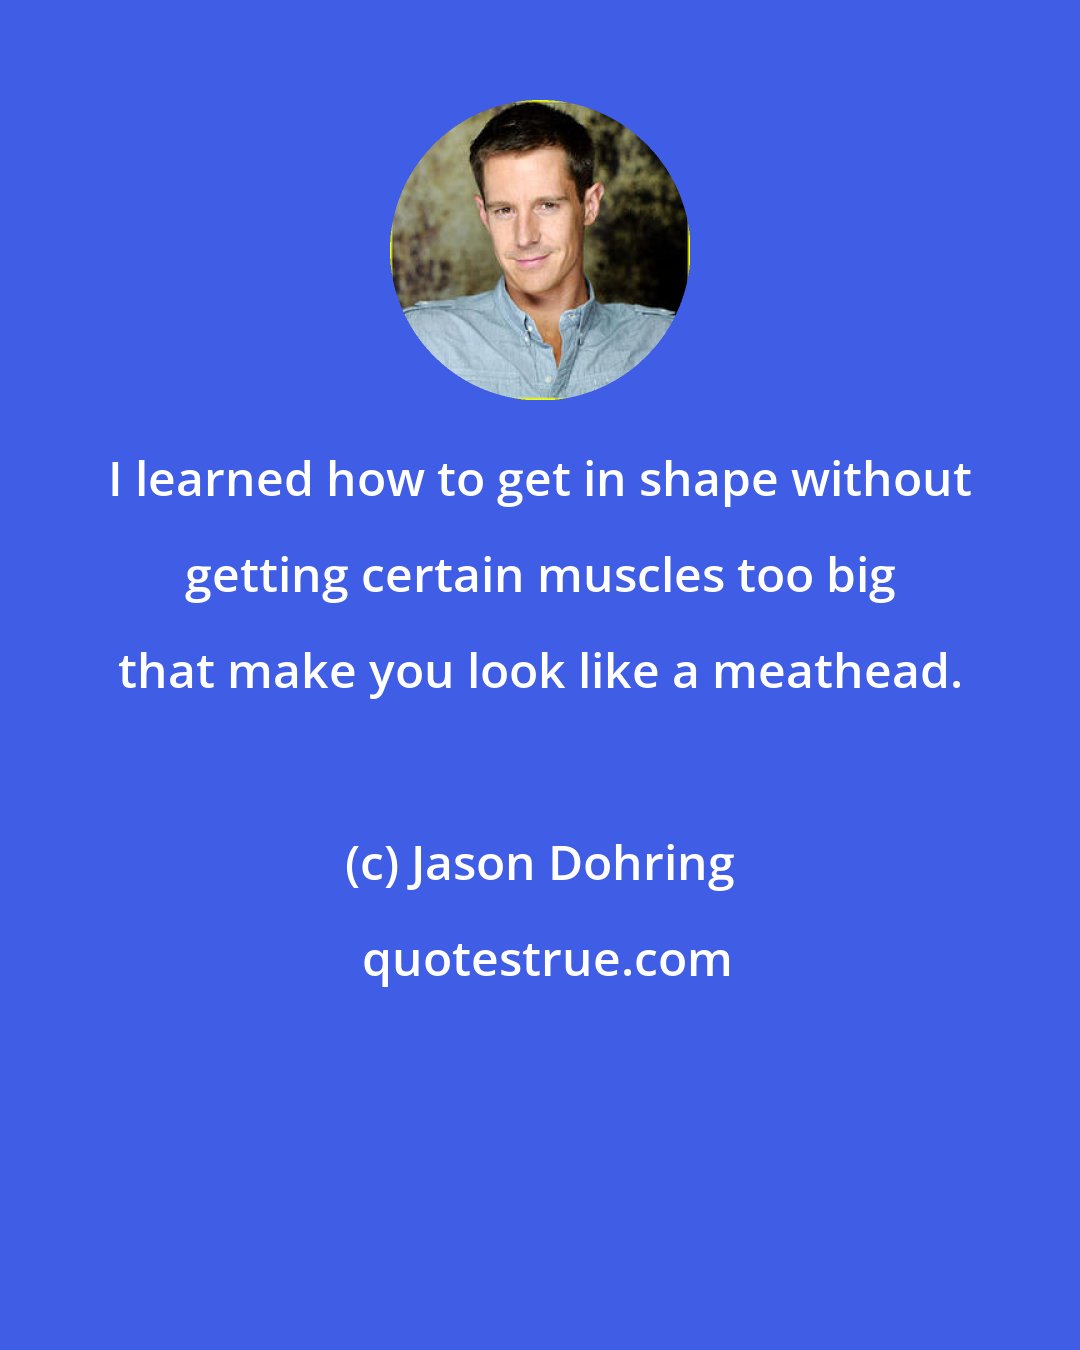 Jason Dohring: I learned how to get in shape without getting certain muscles too big that make you look like a meathead.